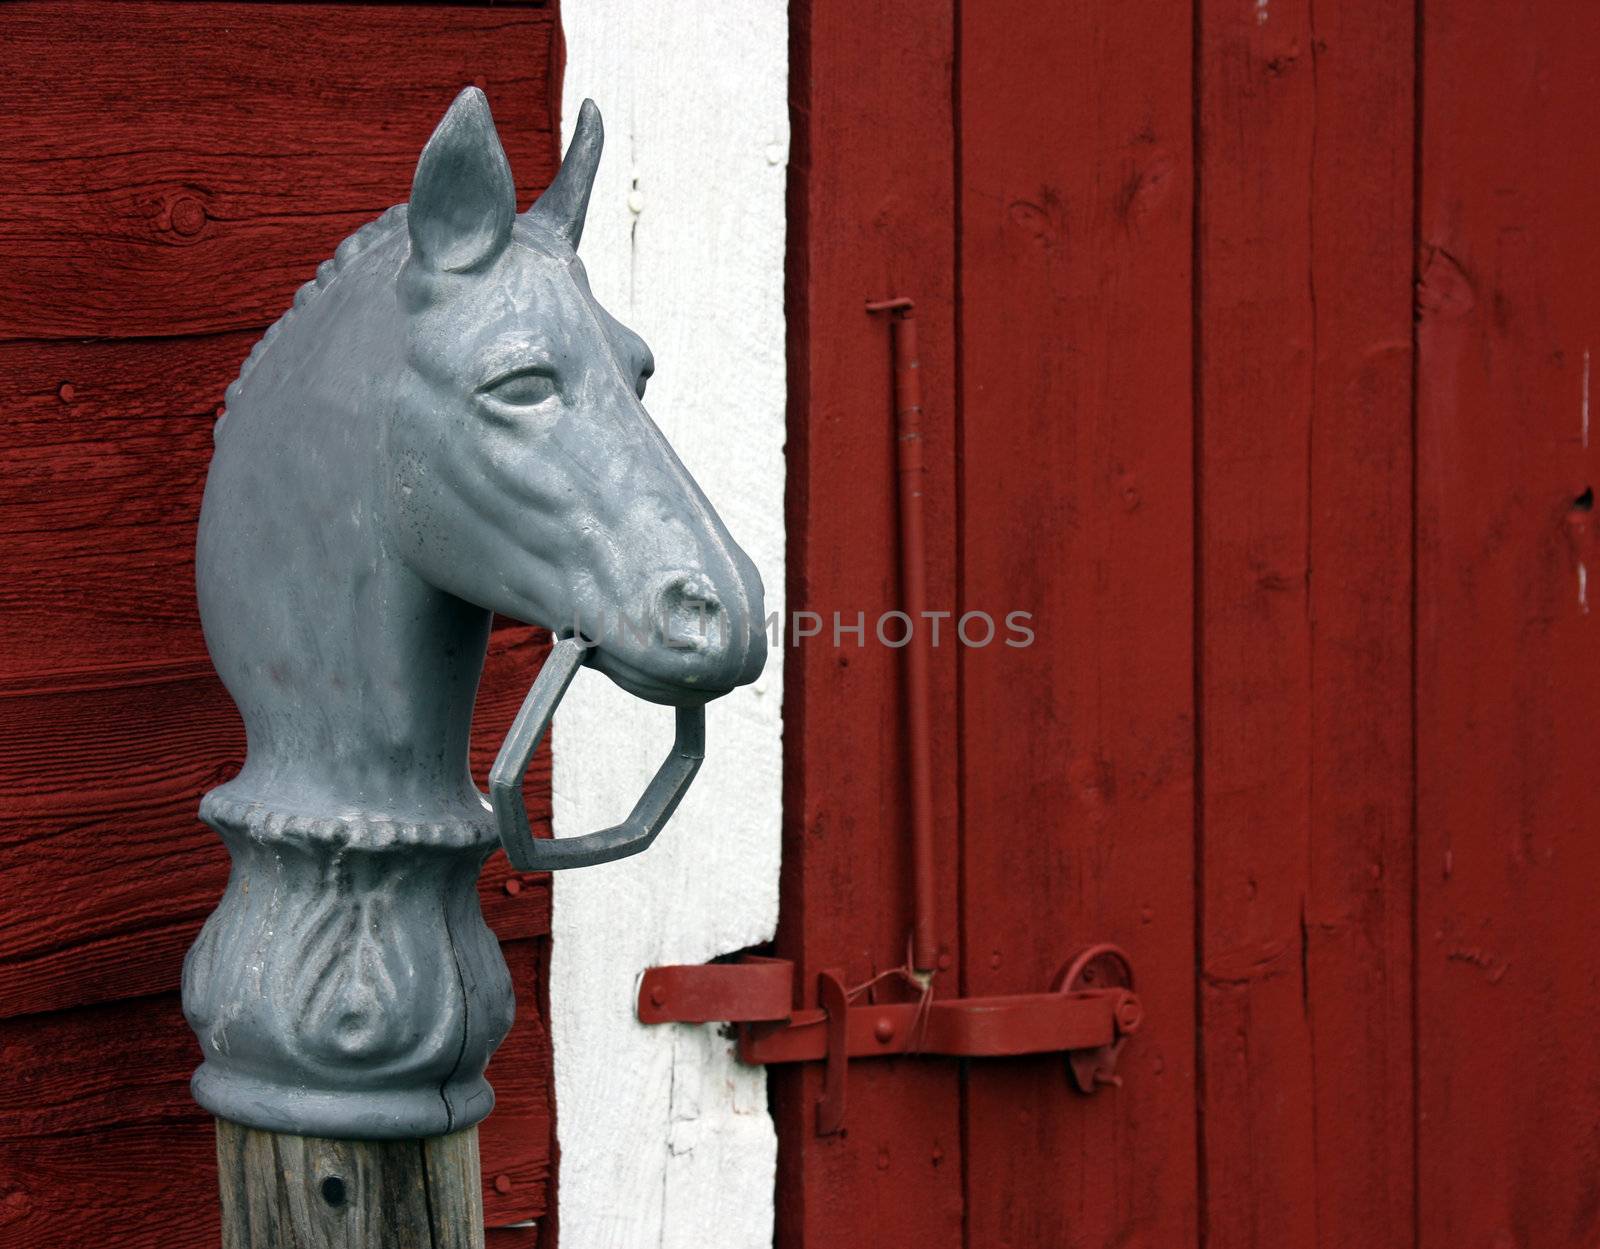 horse hitching post in front of a red barn latched door